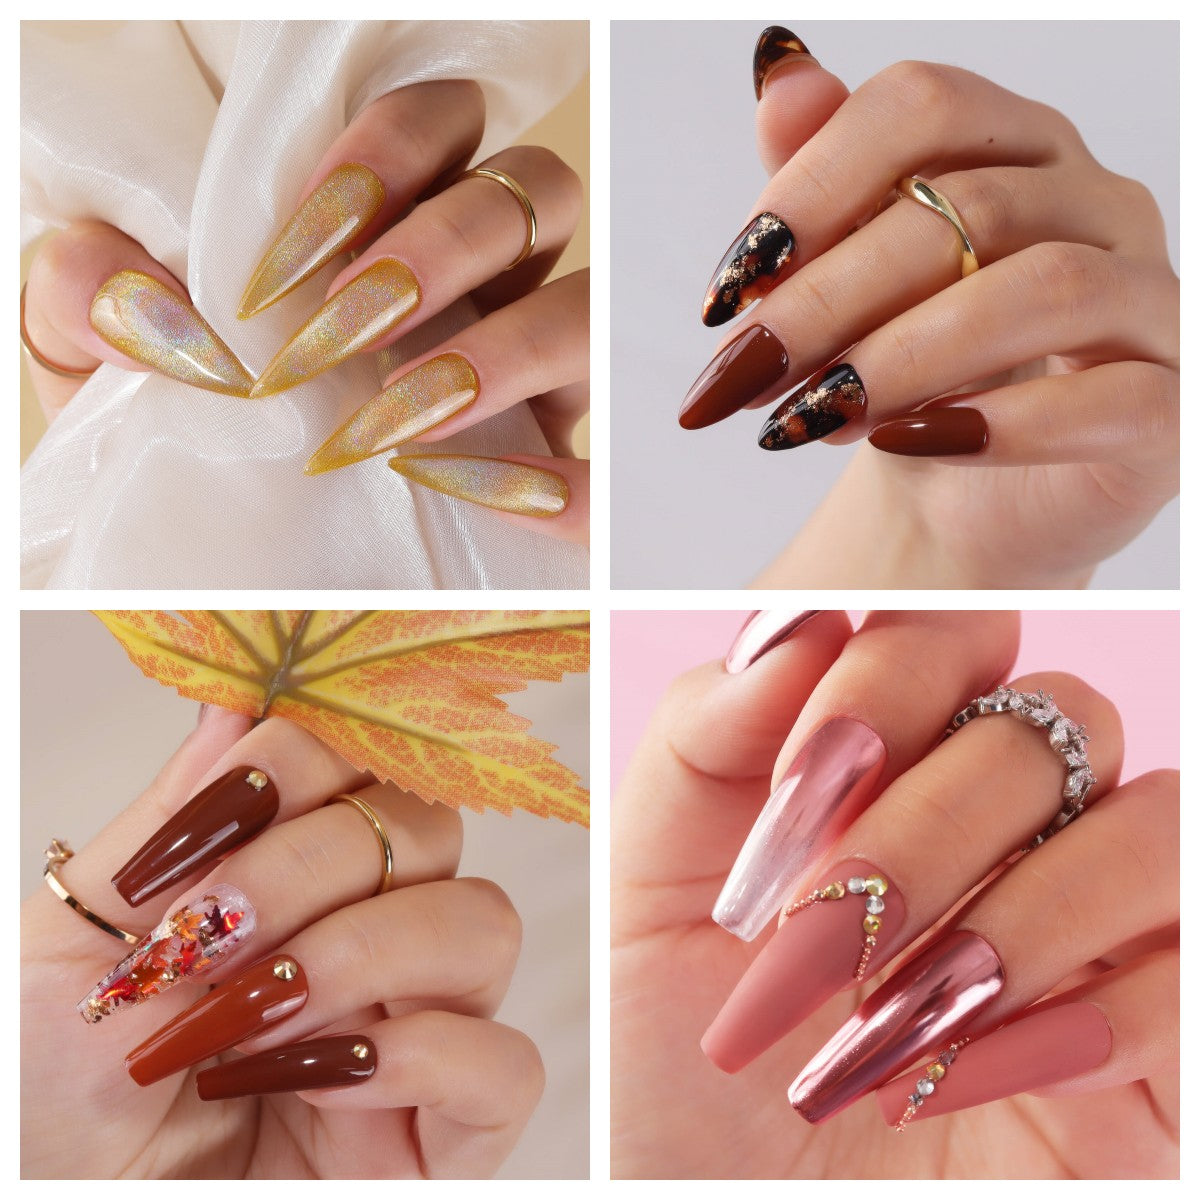 10 Gold Nail Designs and Ideas to Try Now